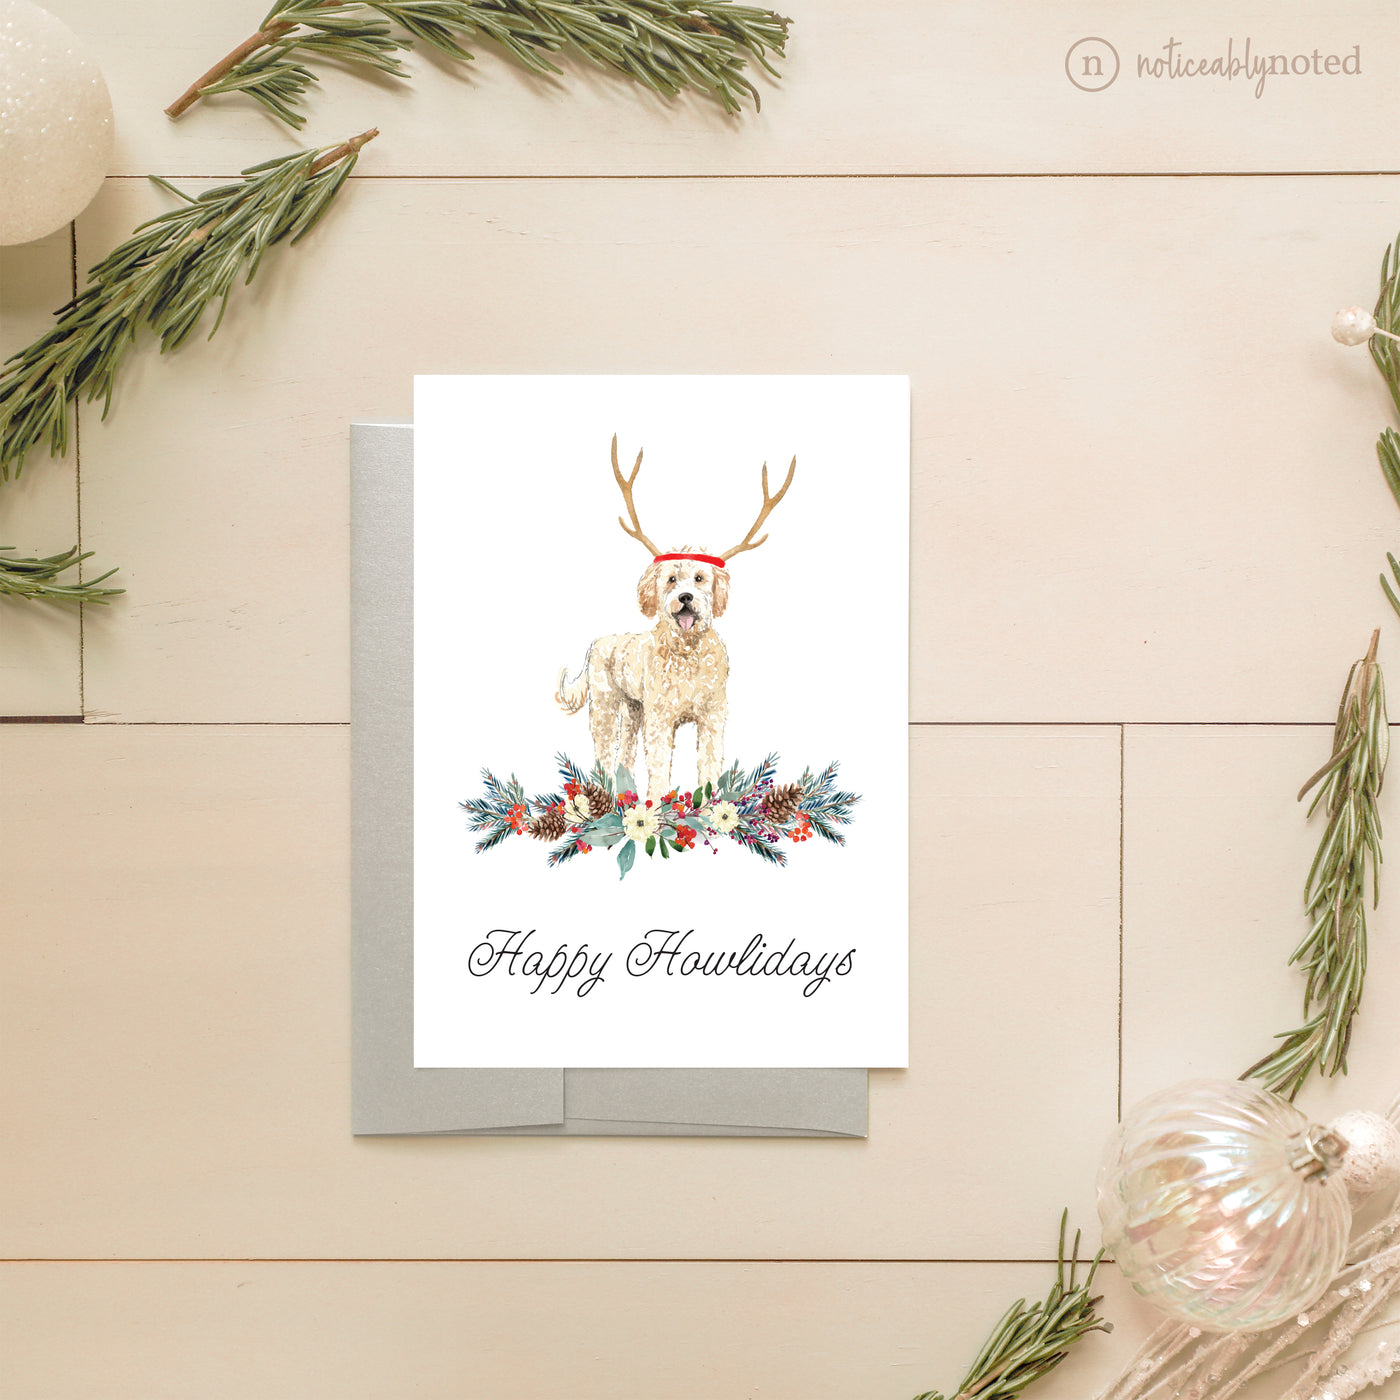 Golden Doodle Dog Holiday Card | Noticeably Noted